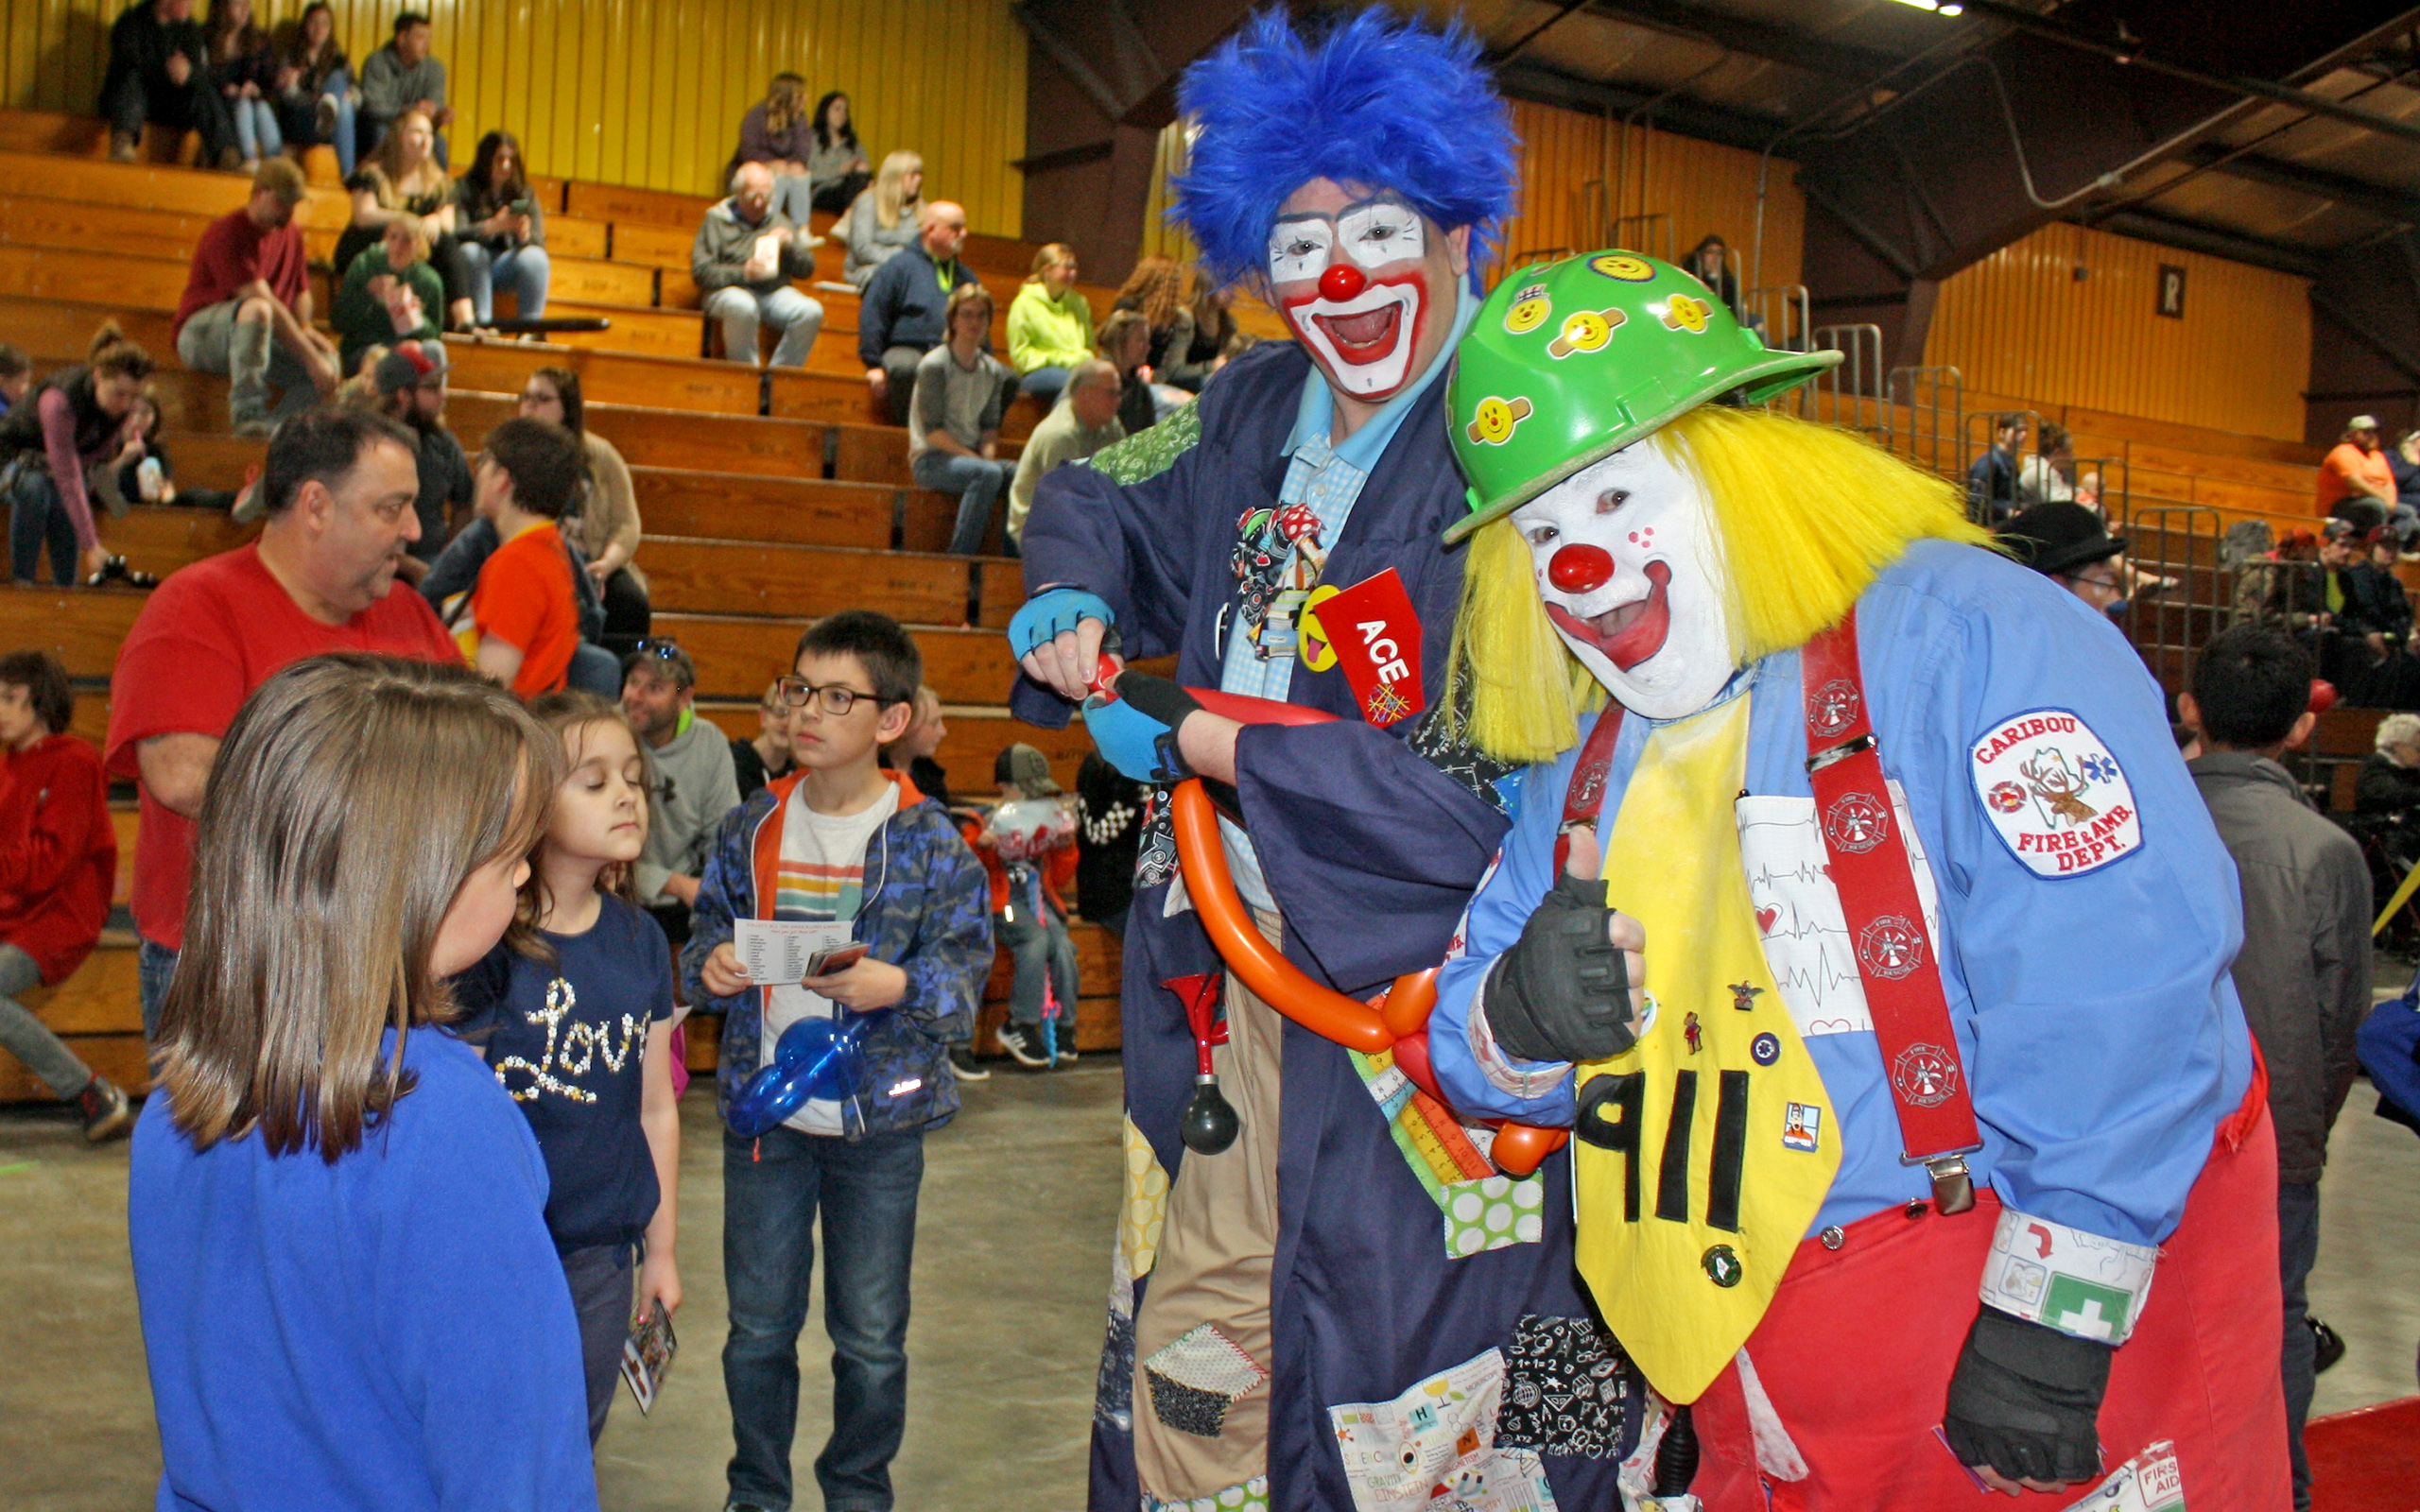 return droves to Anah Shrine Circus Presque Isle | The County